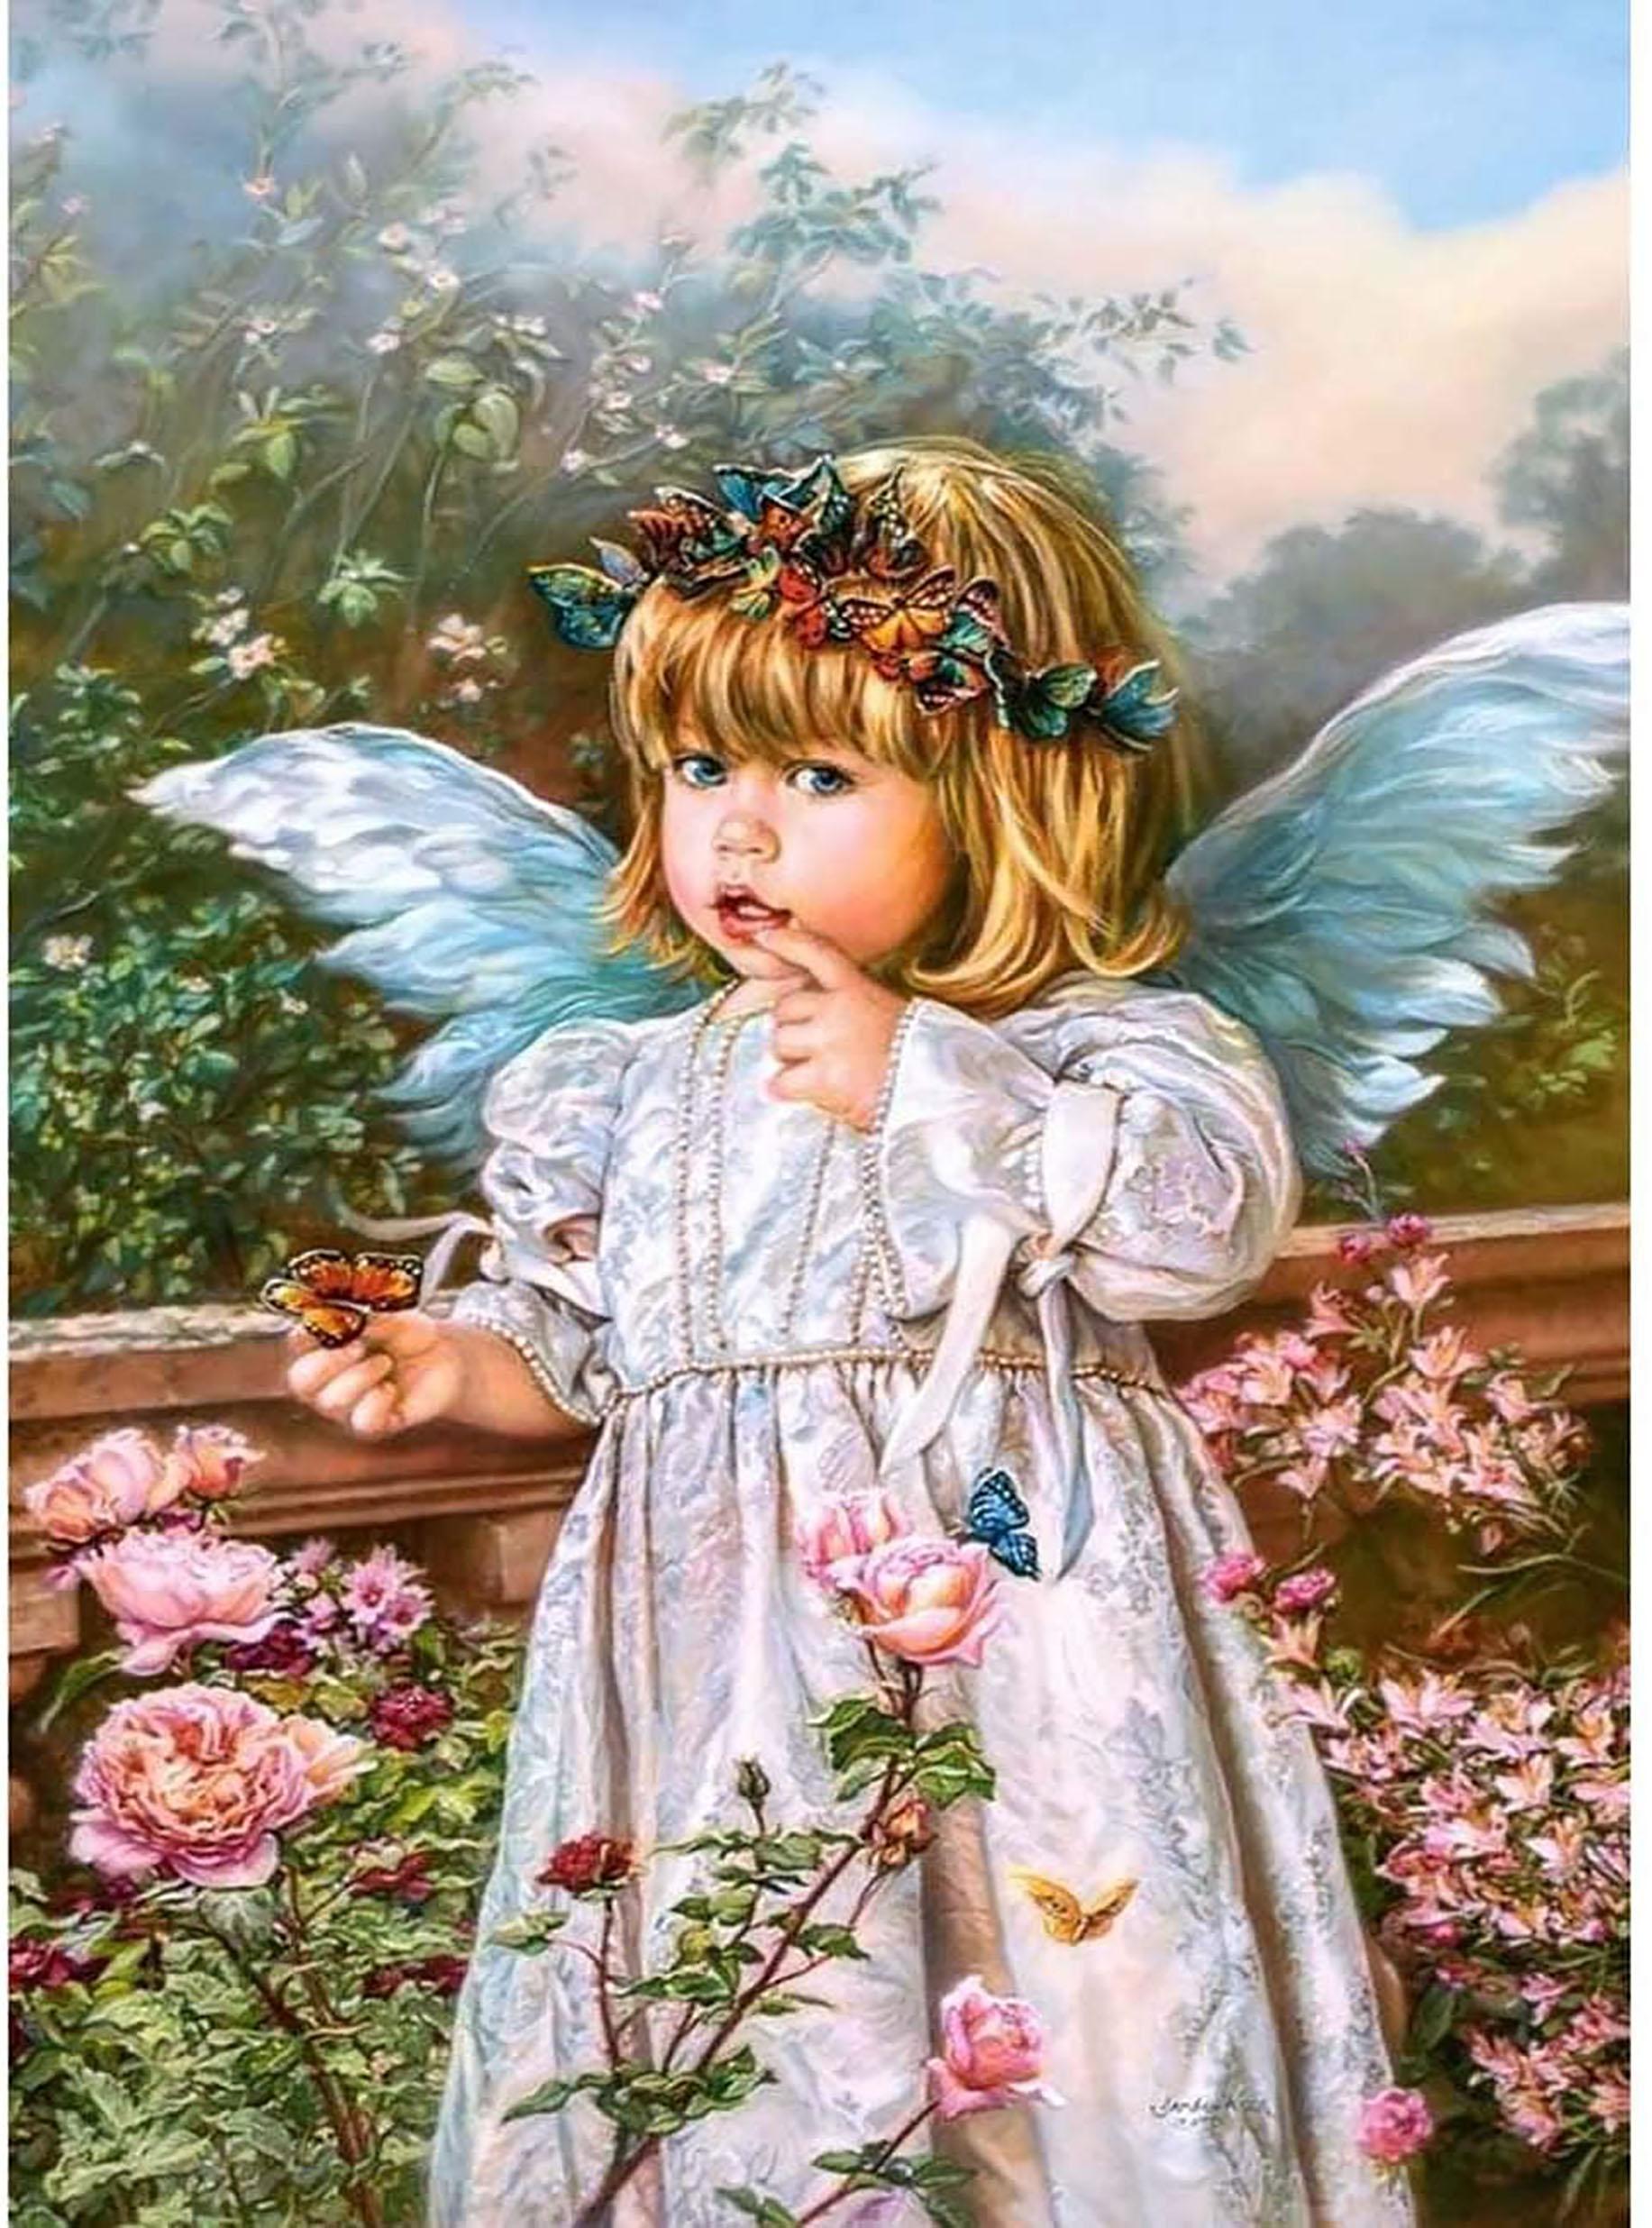 Bimkole 5D Diamond Painting Angel Little Girl Full Drill by Number Kits DIY Rhinestone Pasted 12x16inch